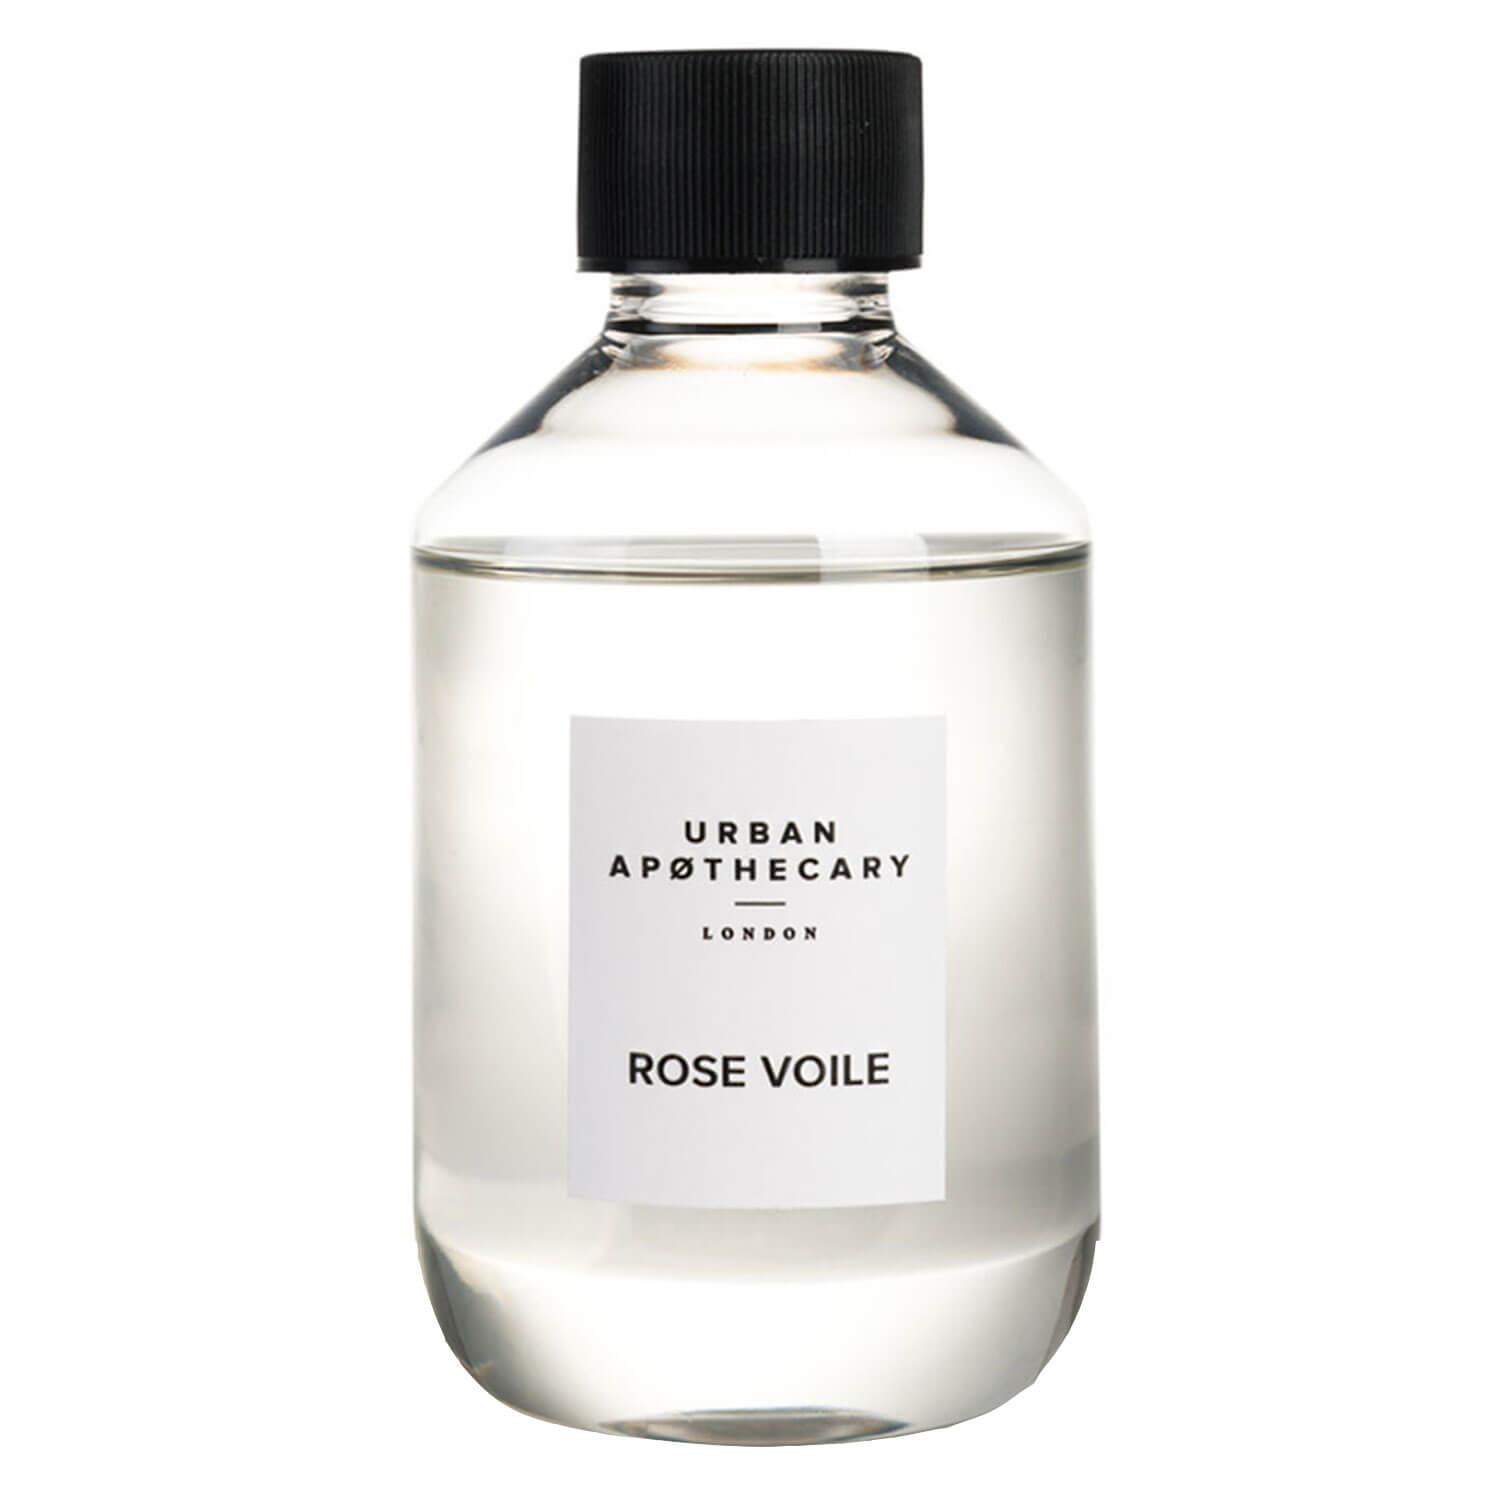 Urban Apothecary - Diffuser Refill Rose Voile